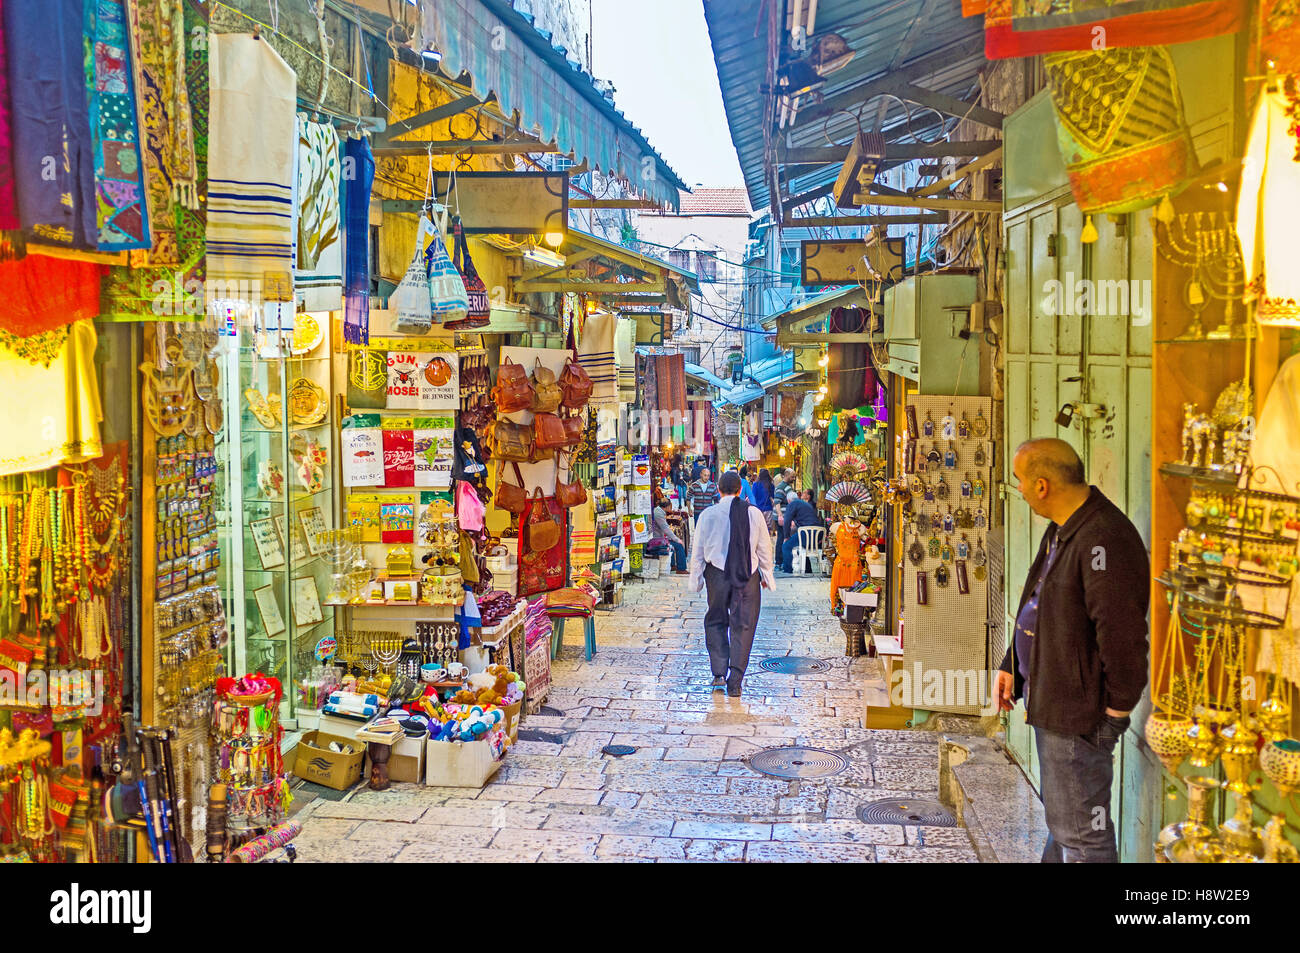 The stalls on King David street wait for the tourists and offer the different local souvenirs and crafts Stock Photo